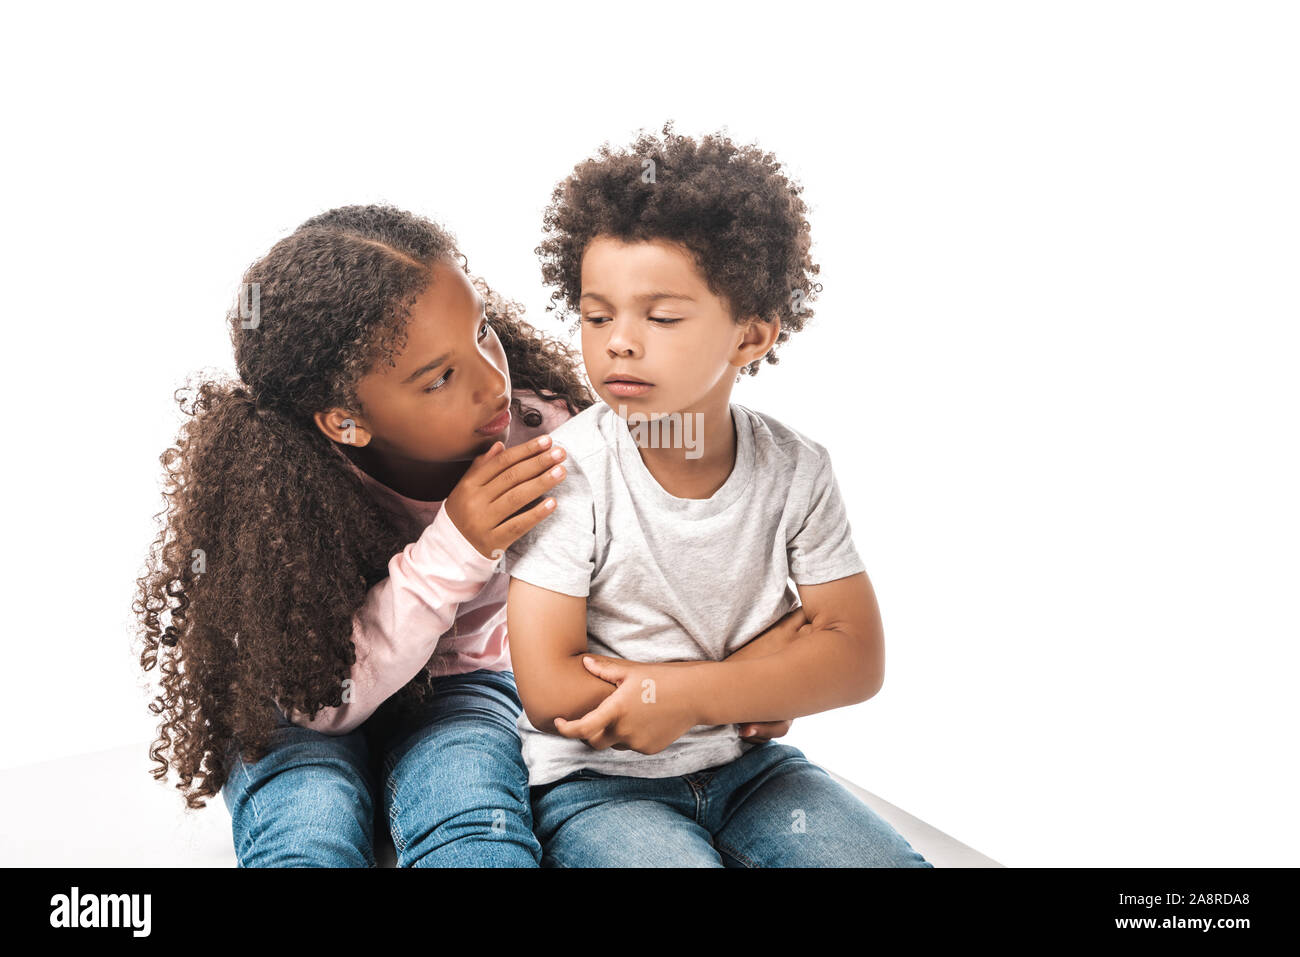 attentive african american sister calming down upset brother isolated on white Stock Photo